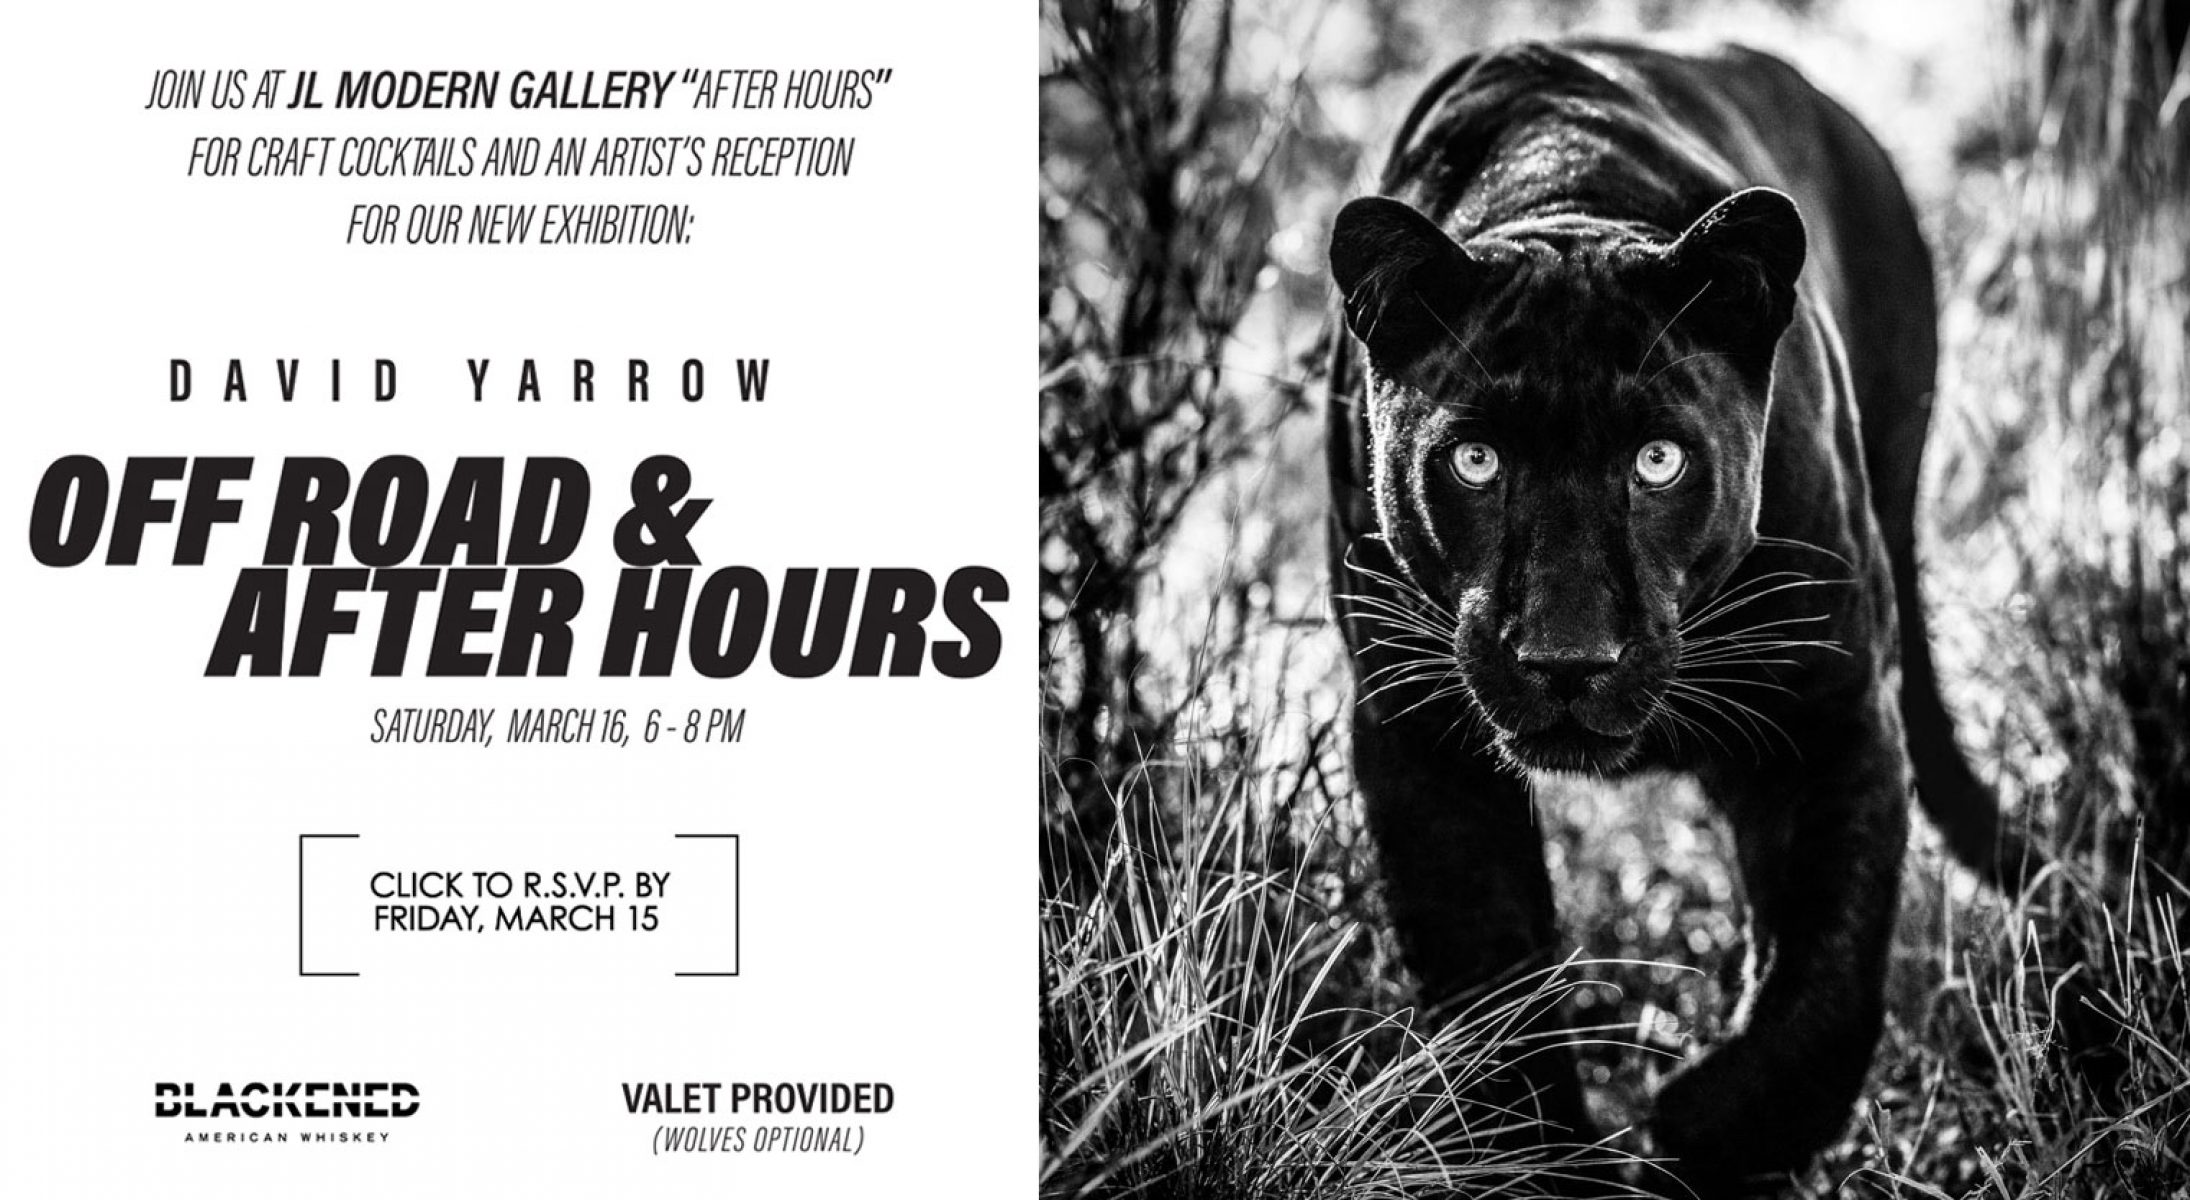 David Yarrow: Off Road & After Hours